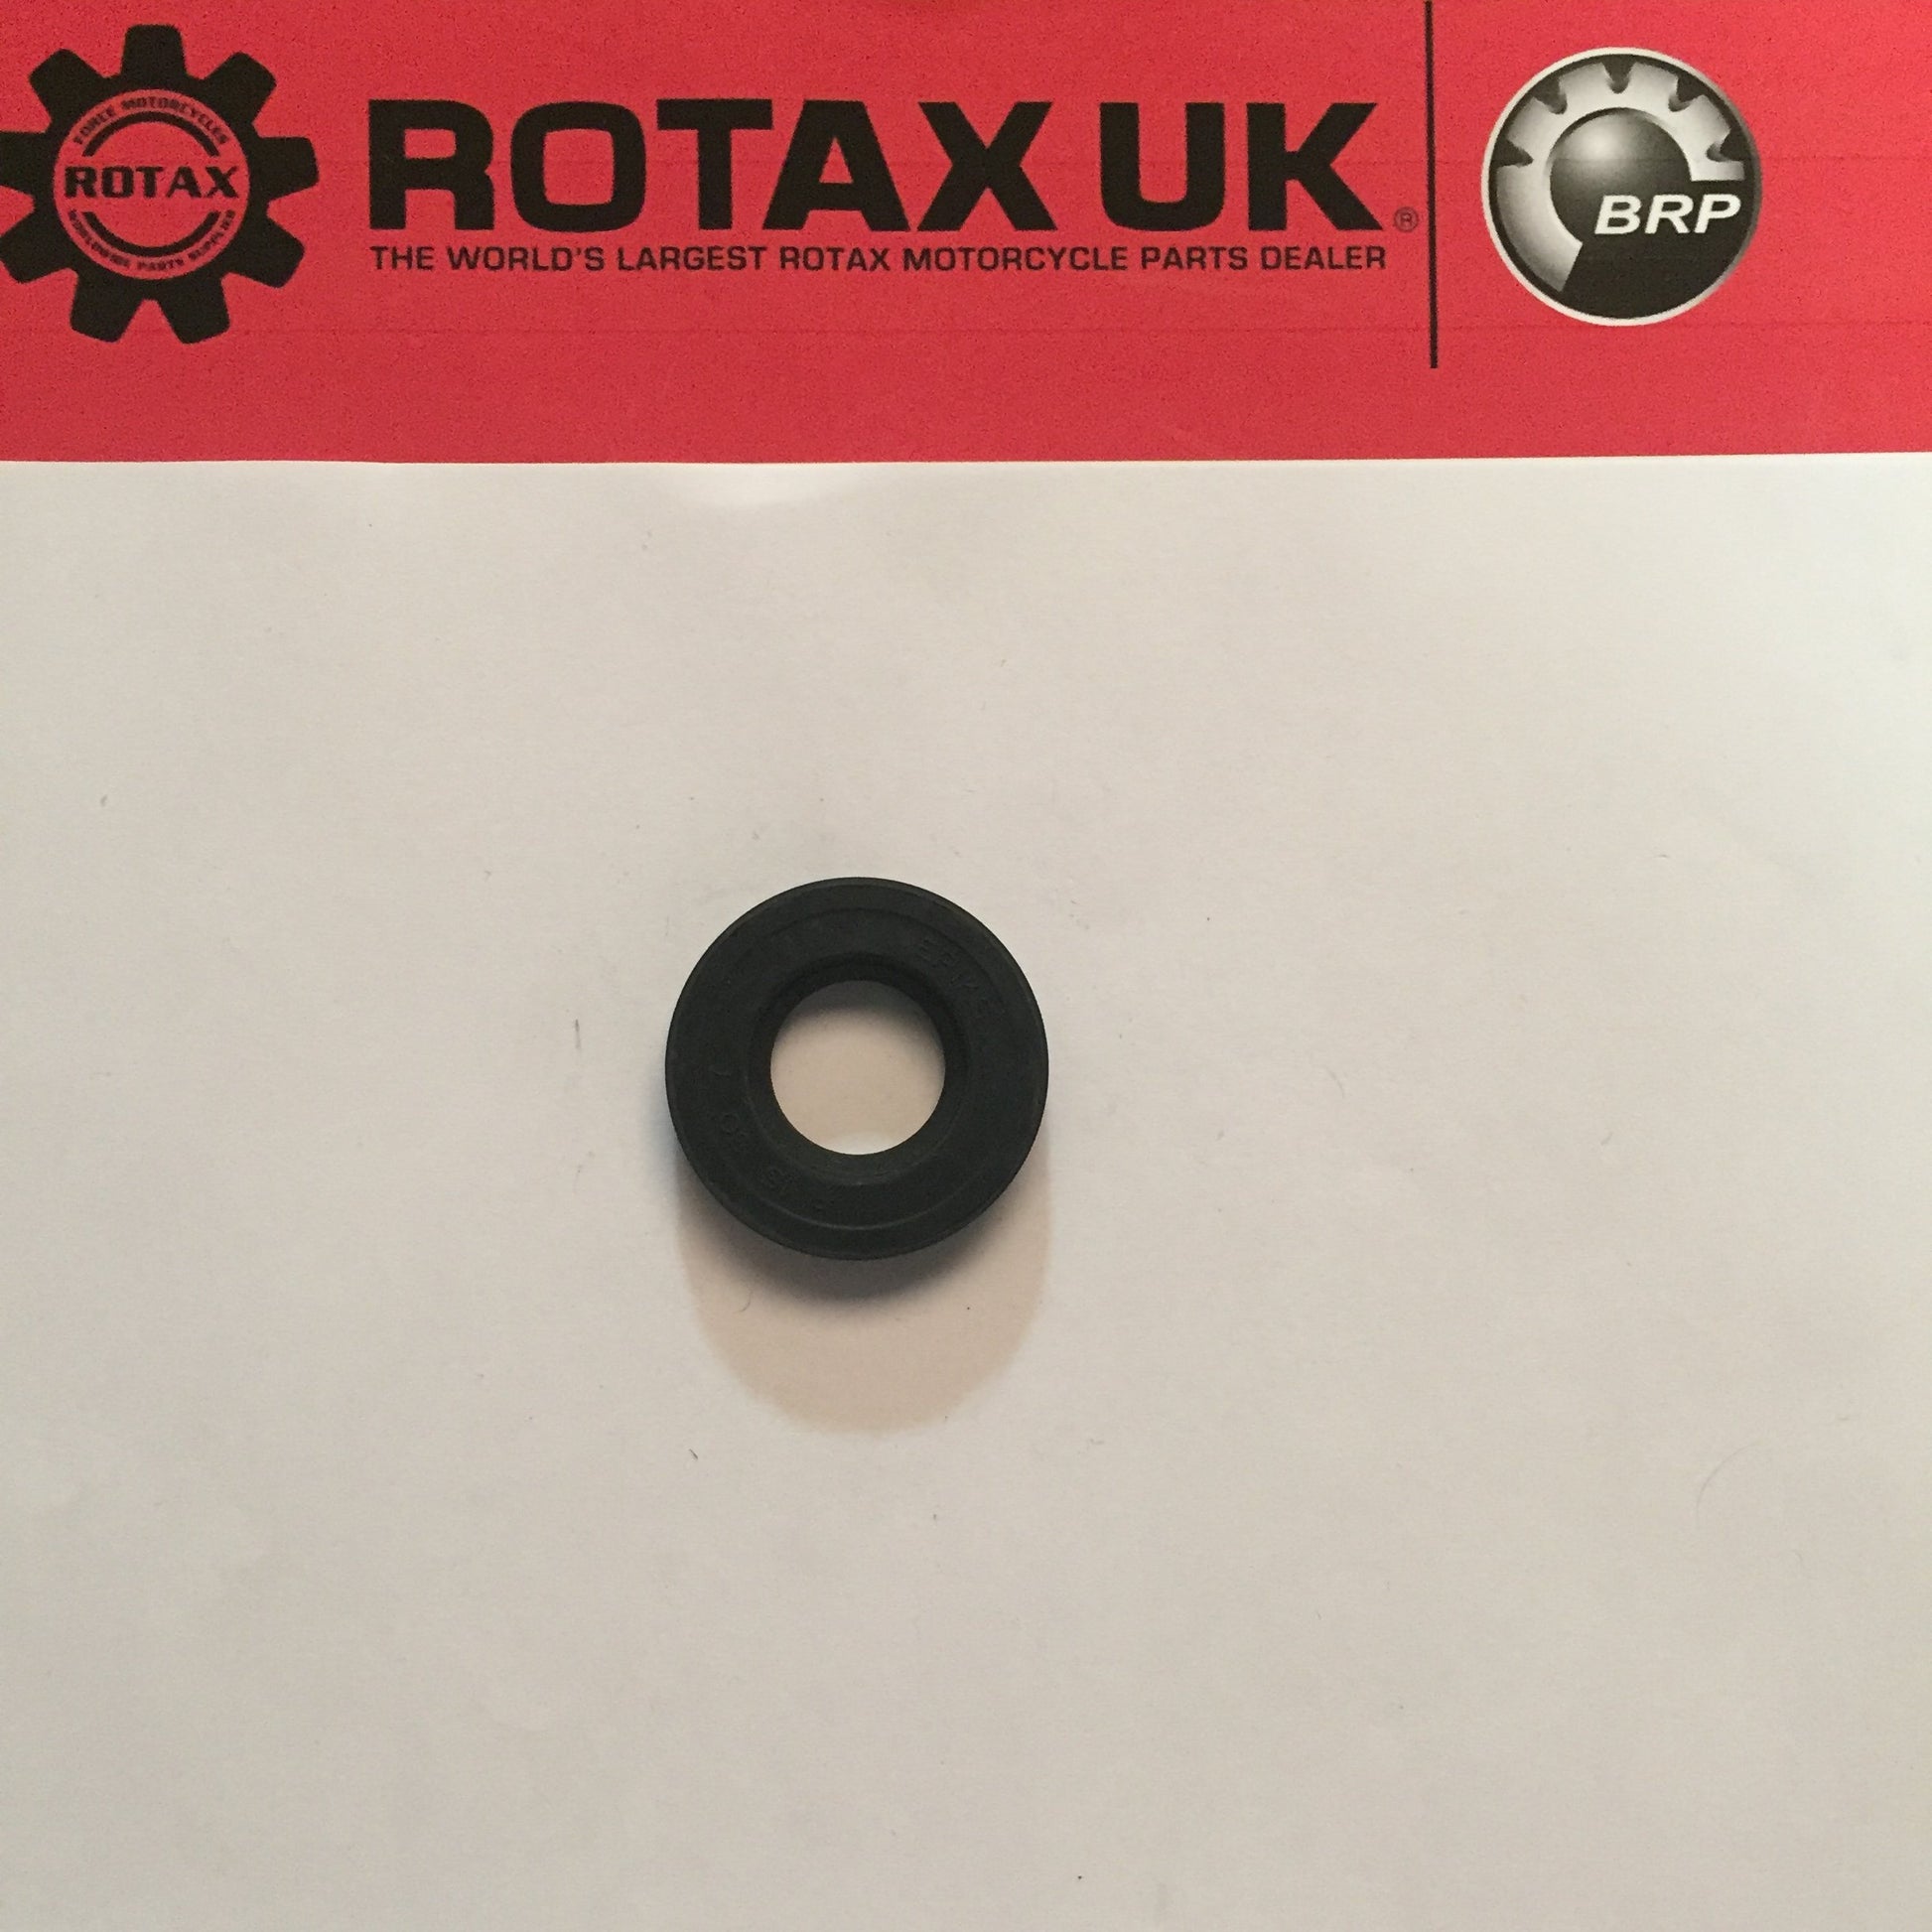 250590 - Oil Seal for engine types: 605.